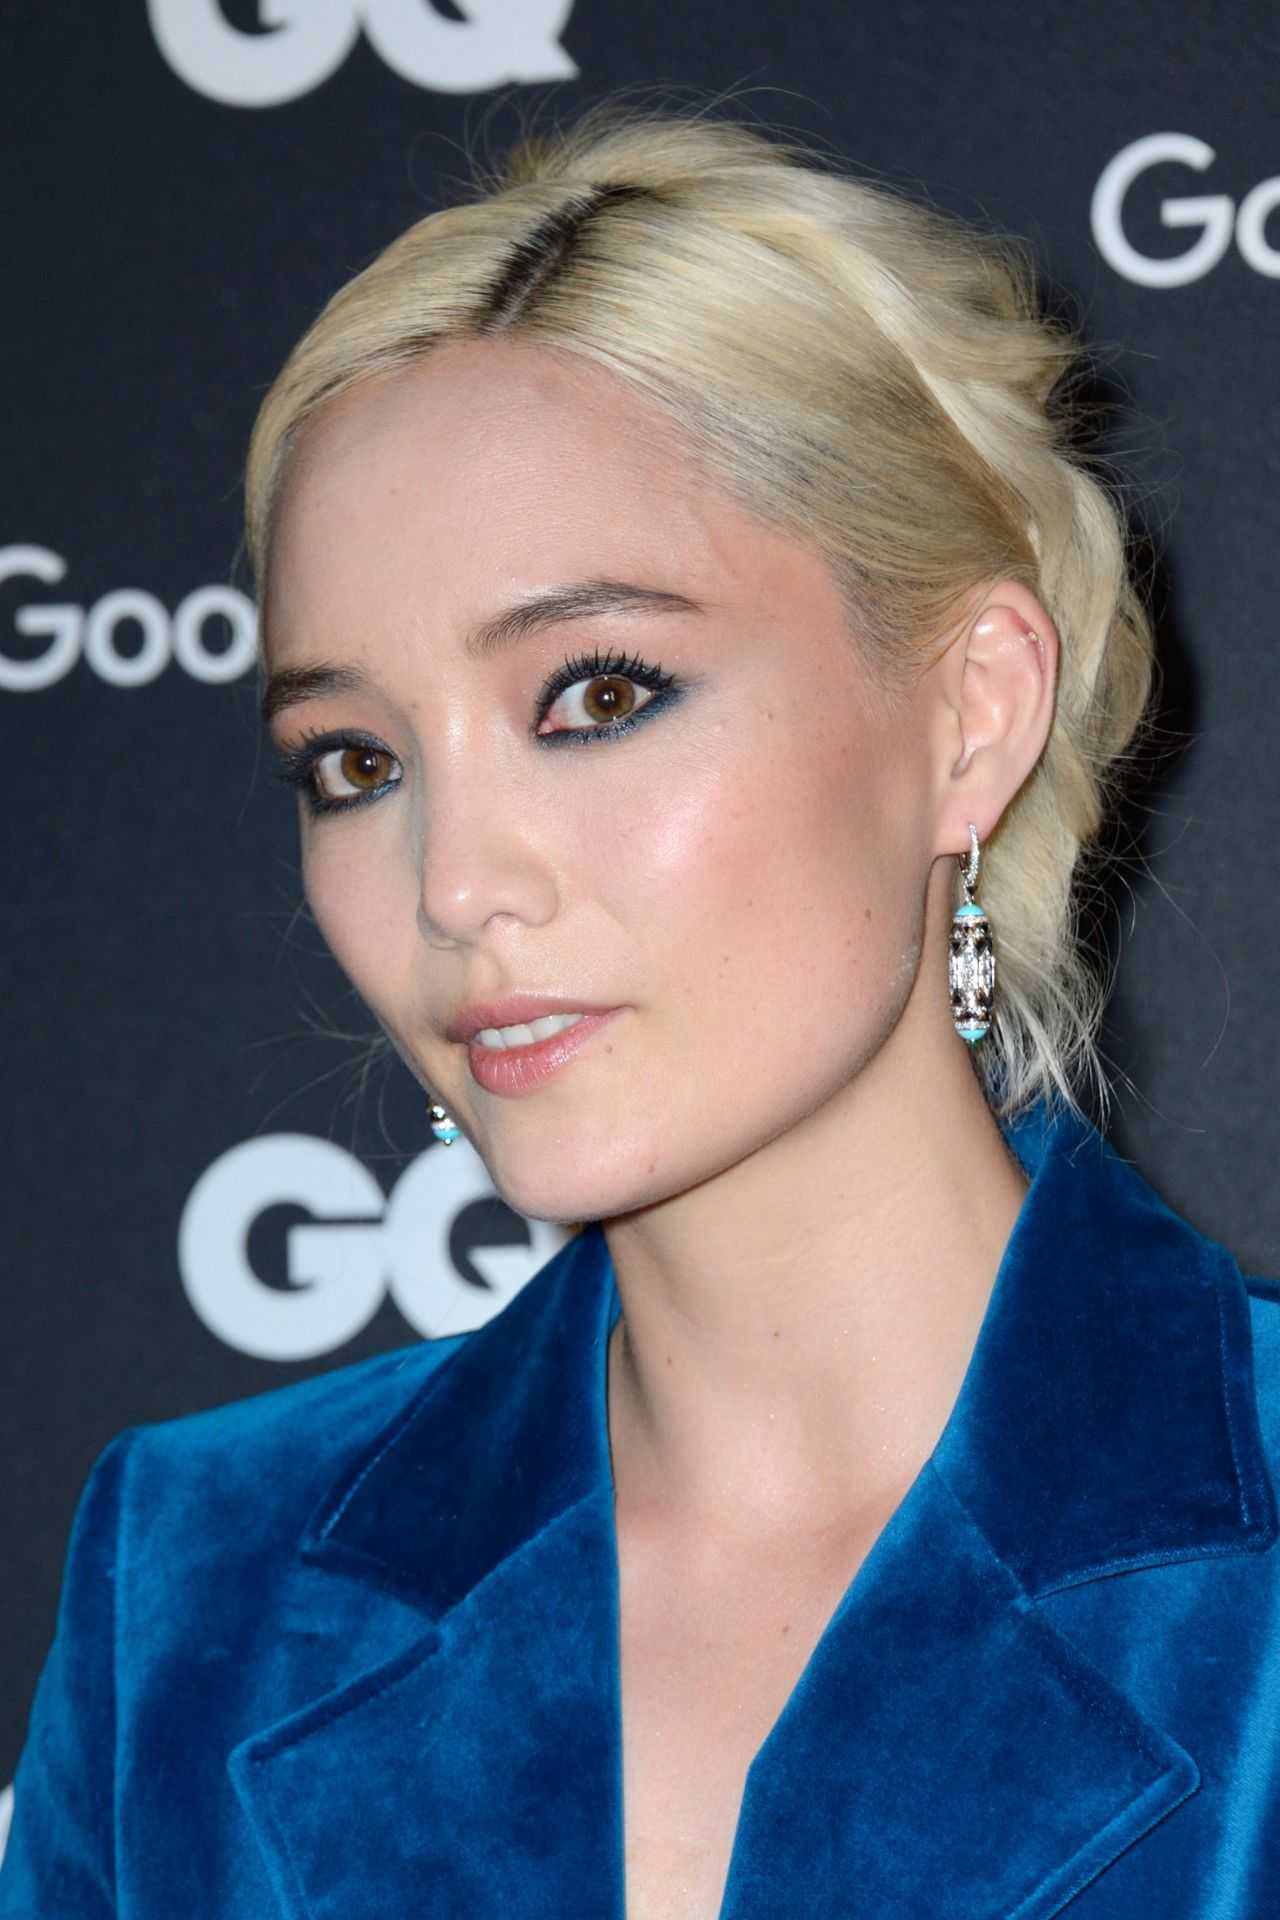 70+ Hot Pictures Of Pom Klementieff Who Plays Mantis In Marvel Cinematic Universe 23